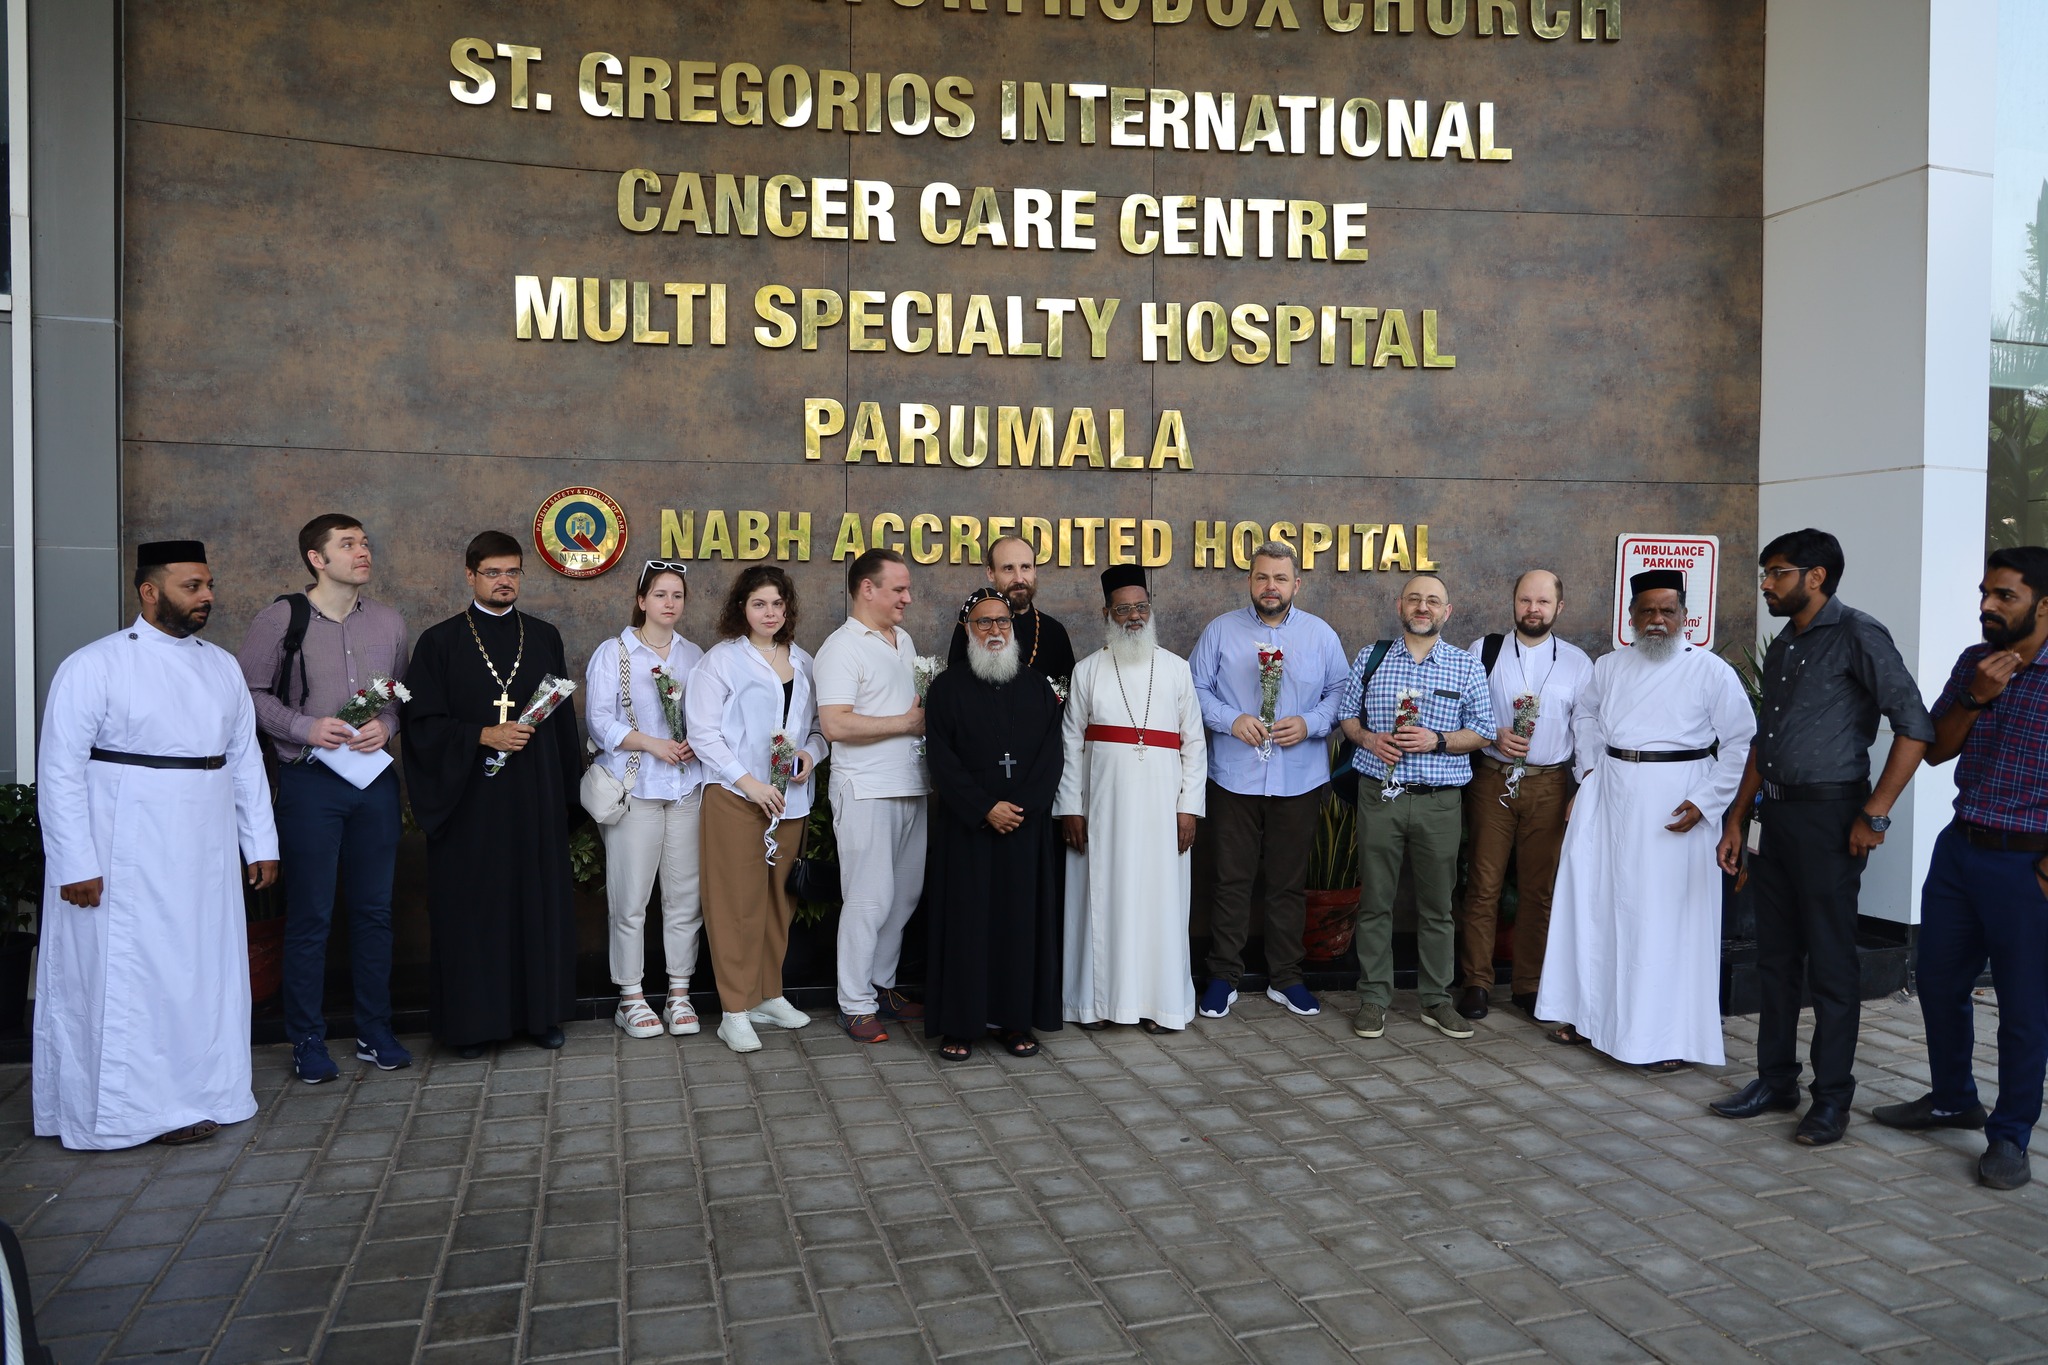 Parumala Hospital Hosts Distinguished Medical Delegation from Russia’s Central Clinical Hospital of Saint Alexis